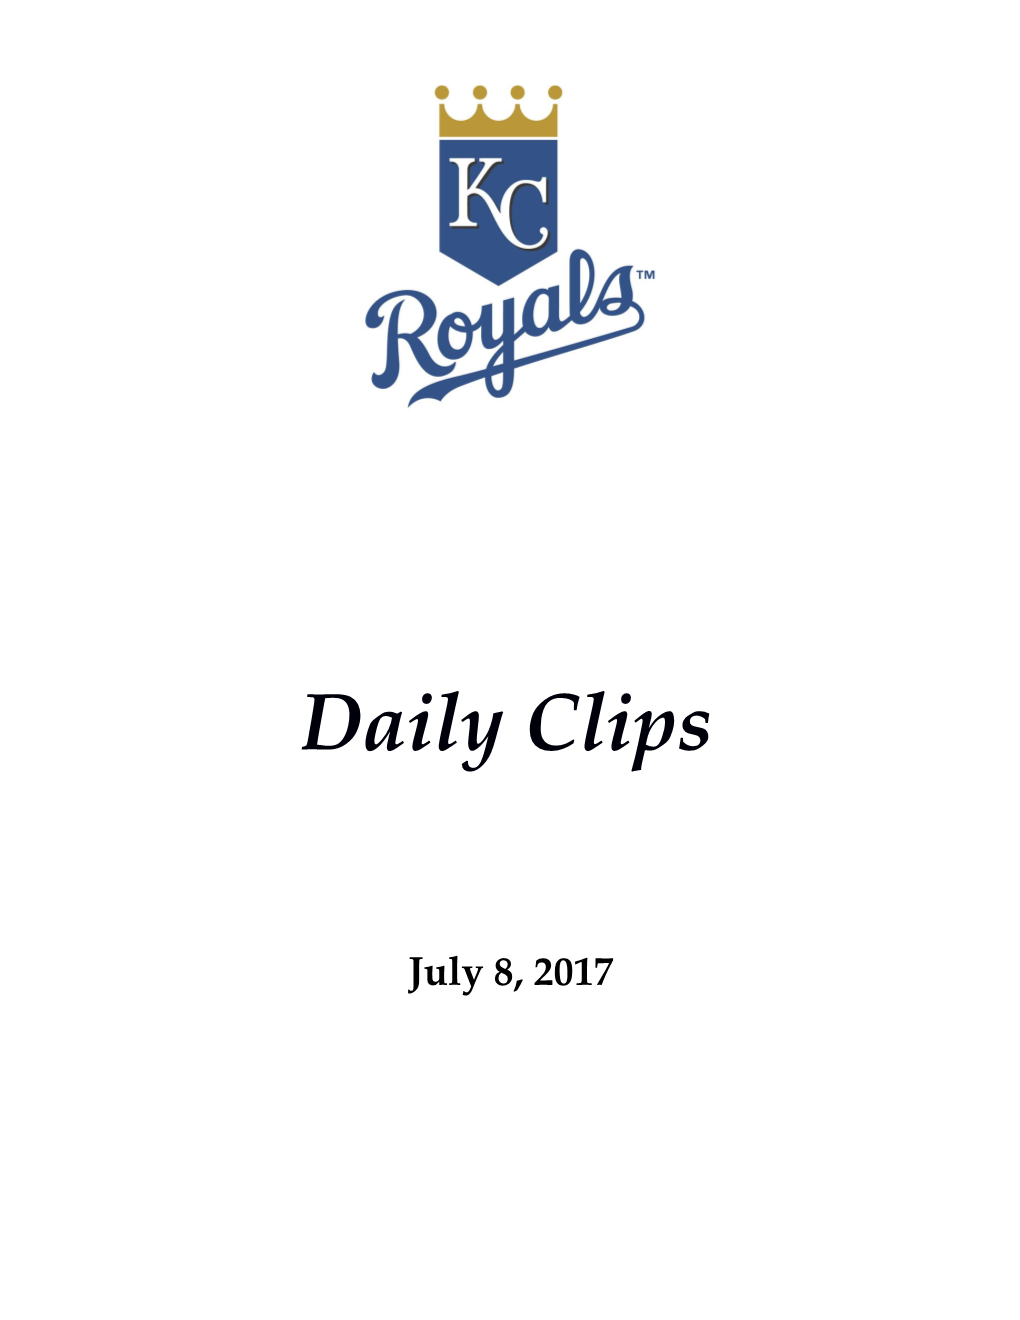 Royals Can't Back Hammel, Fall to Dodgers